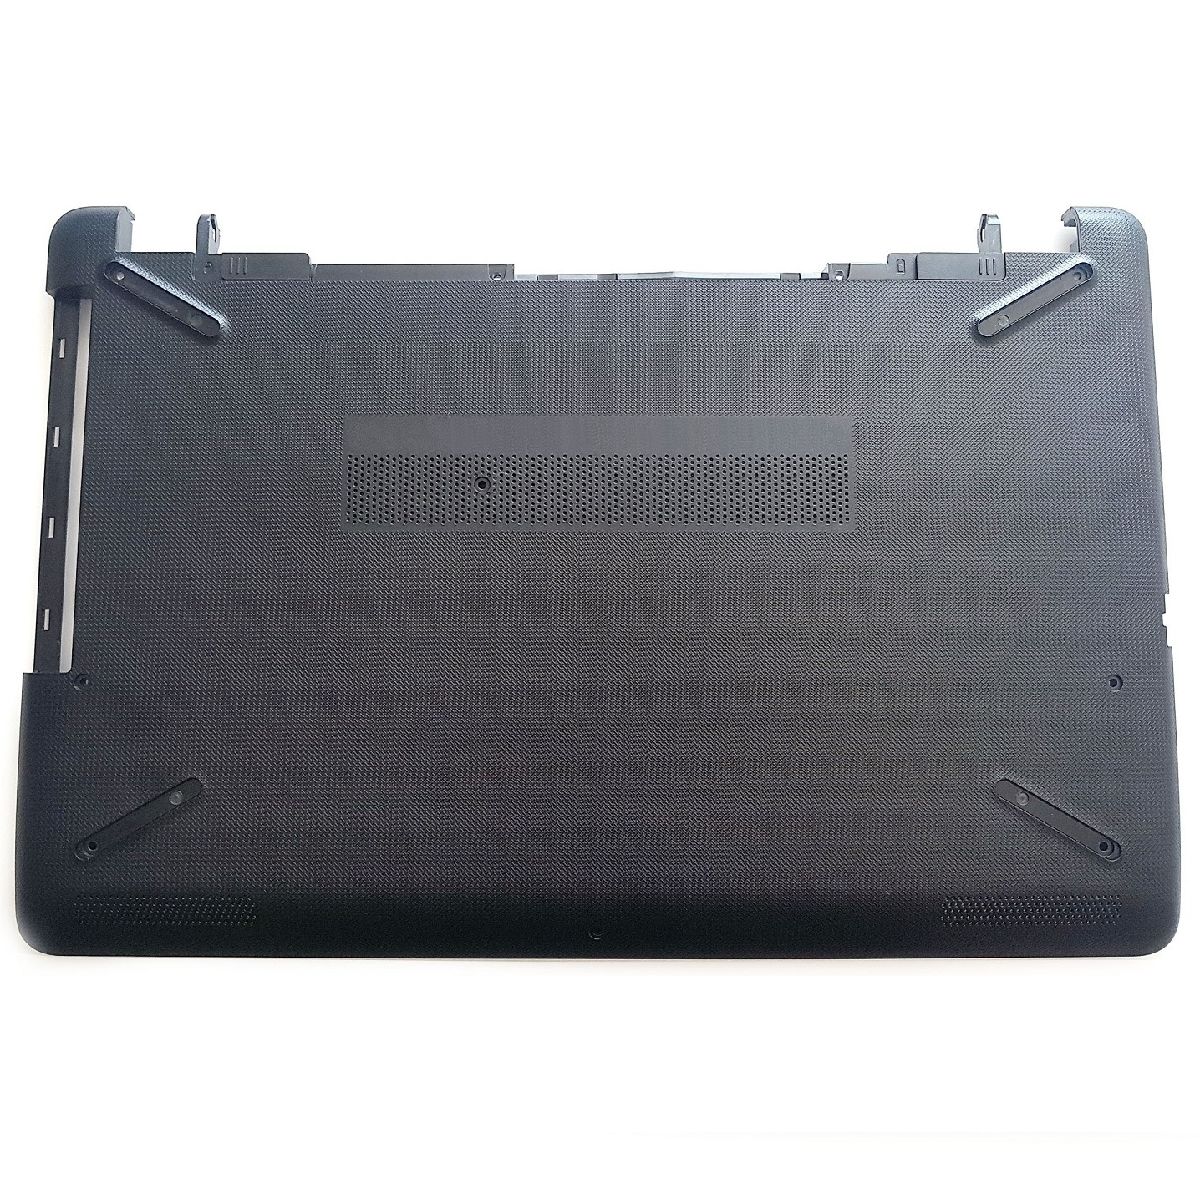 Hp 15-BS034NT, 15-BS035NT, 15-BS036NT, 15-BS037NT, 15-BS038NT, 15-BS039NT Uyumlu Alt Kasa D Cover